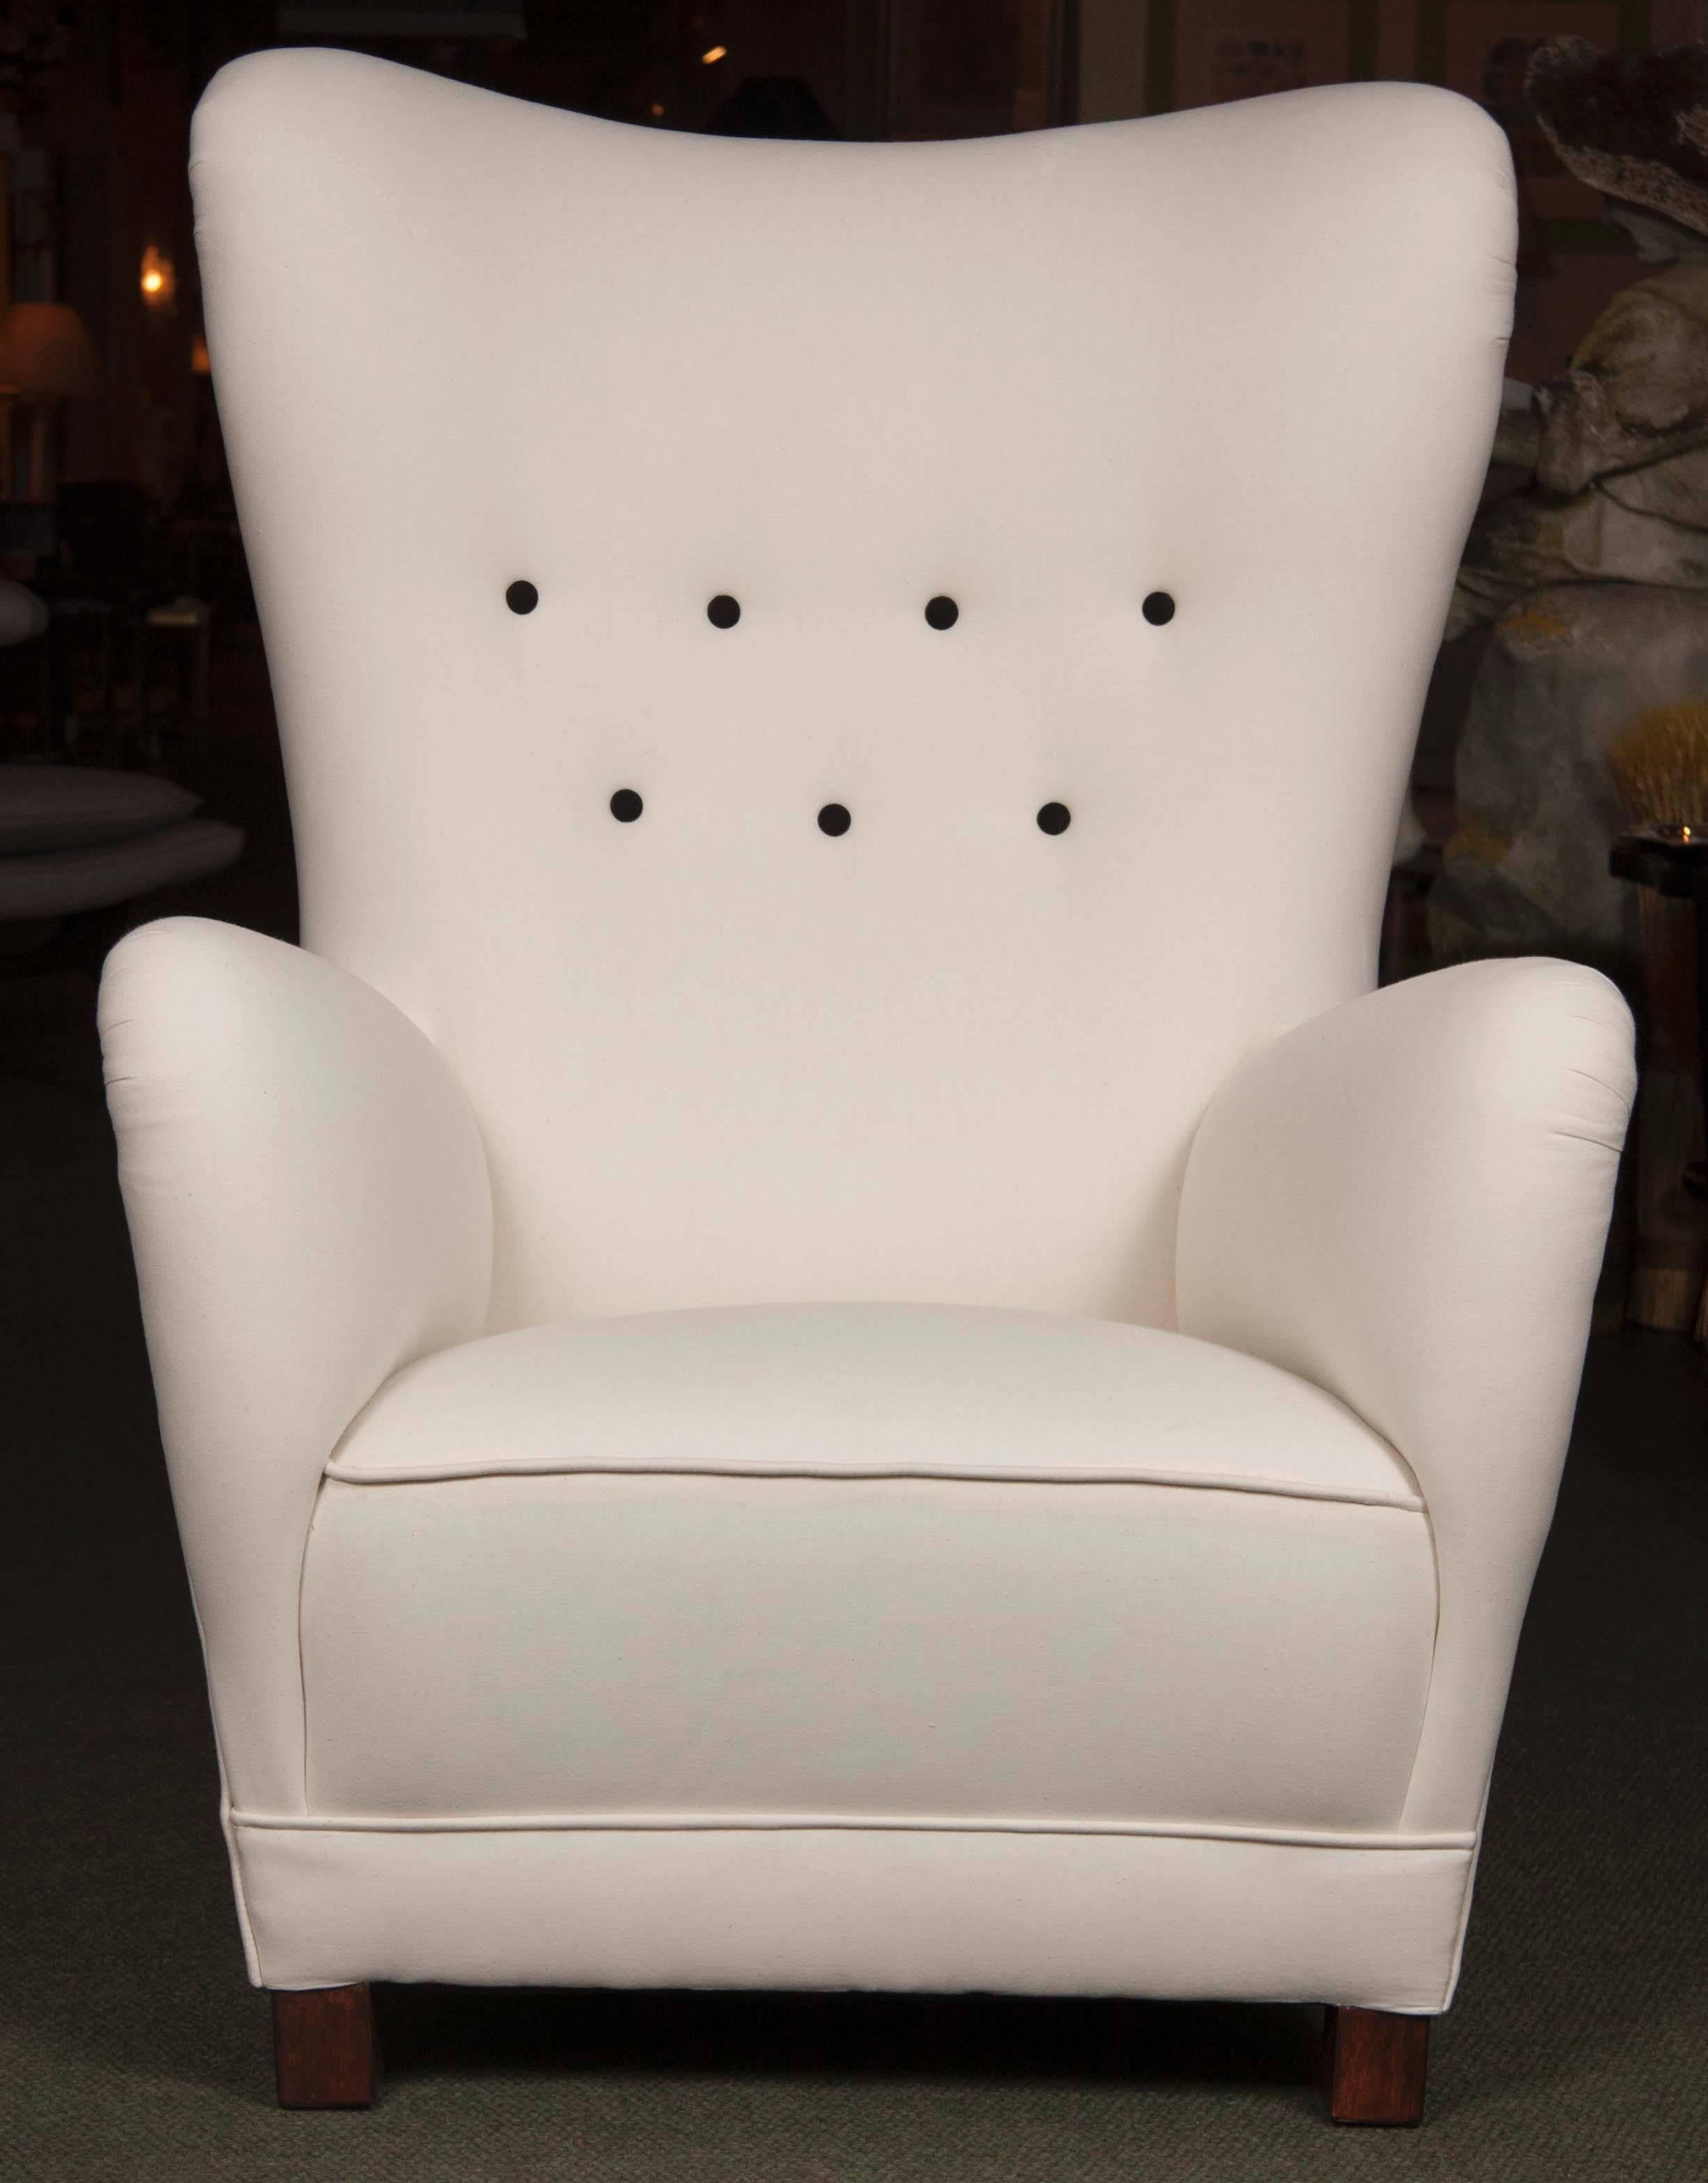 Wing chair attributed to Fritz Hansen upholstered in muslin with black buttons.